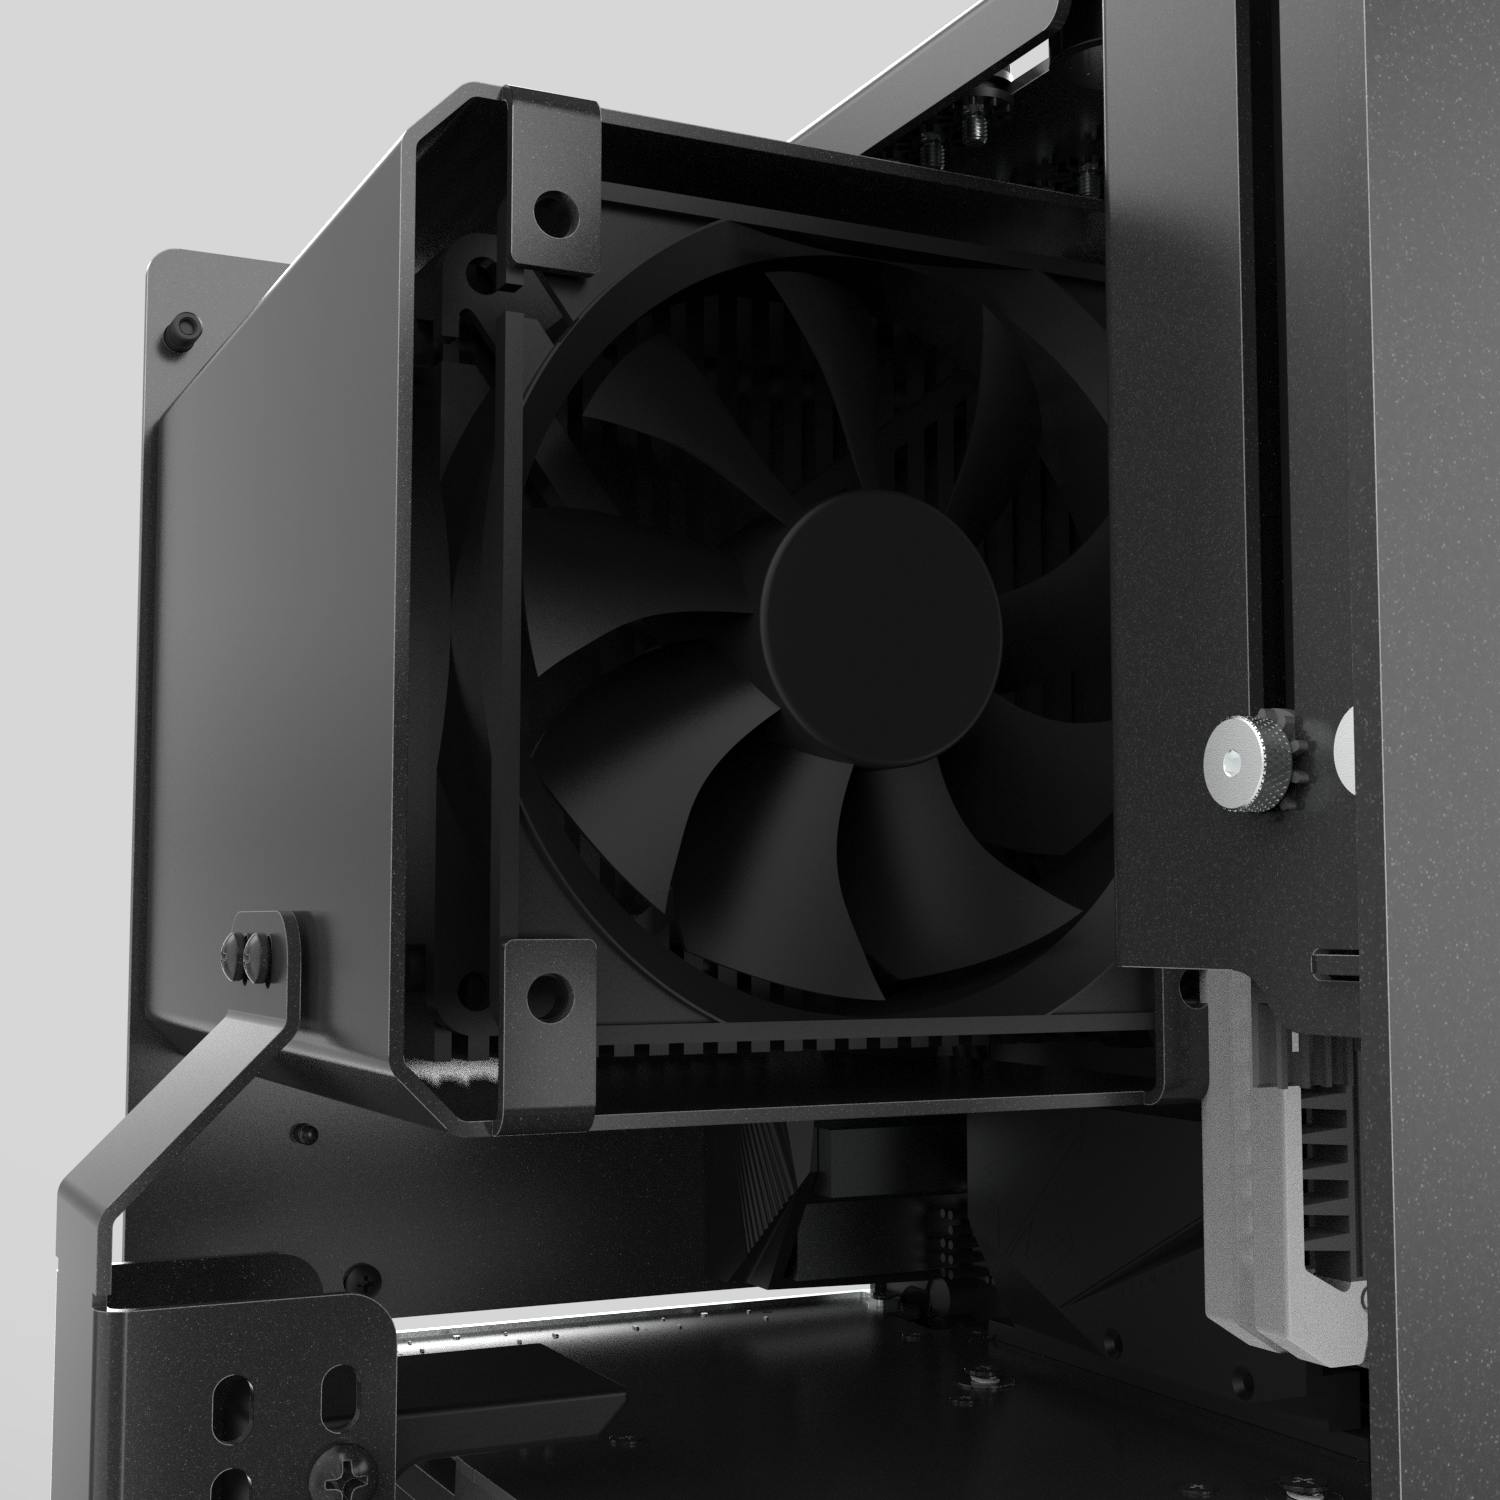 Detail of the CPU cooling duct with fan.